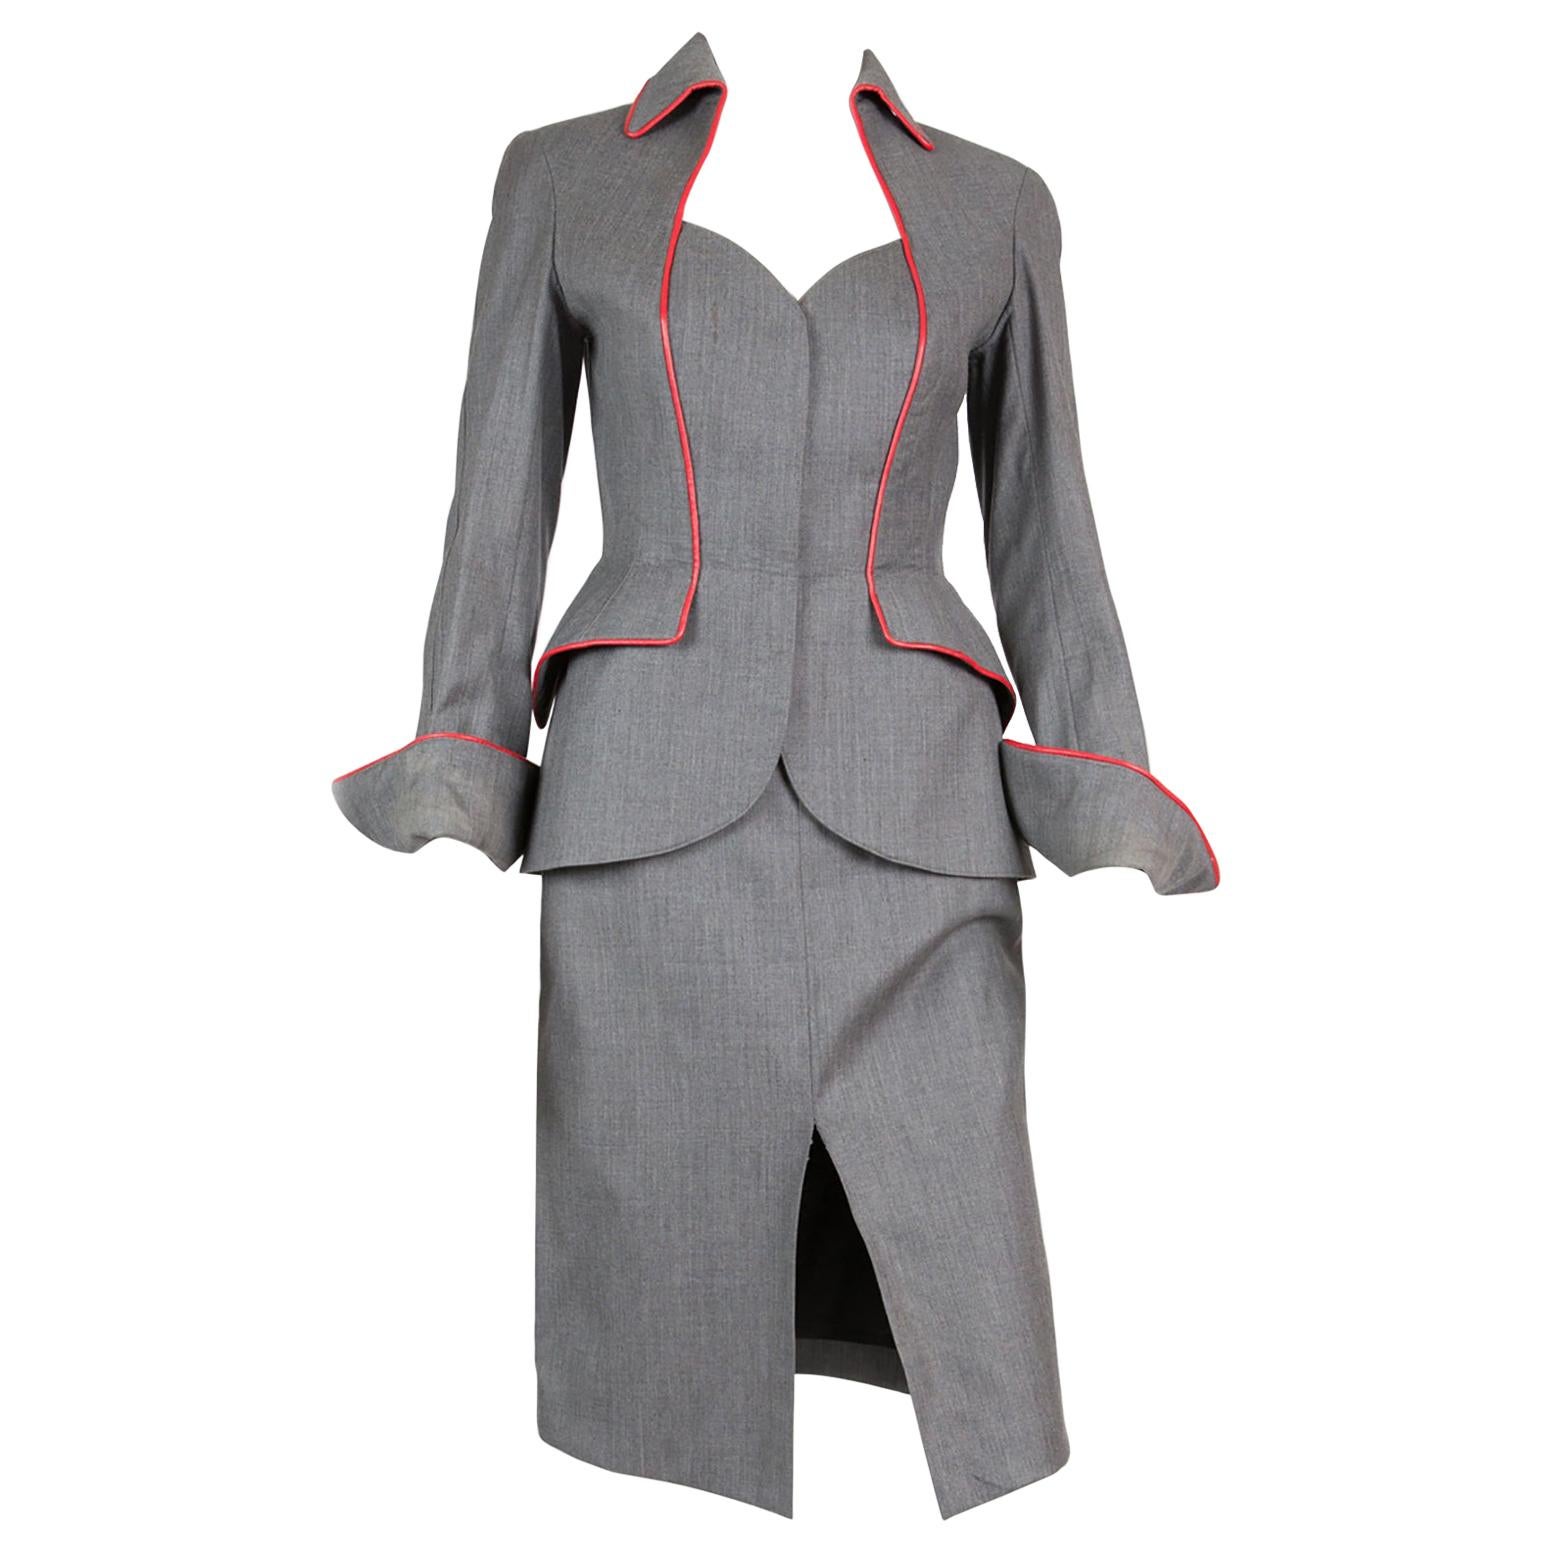 Iconic Thierry Mugler Couture Grey Suit Jacket and Skirt